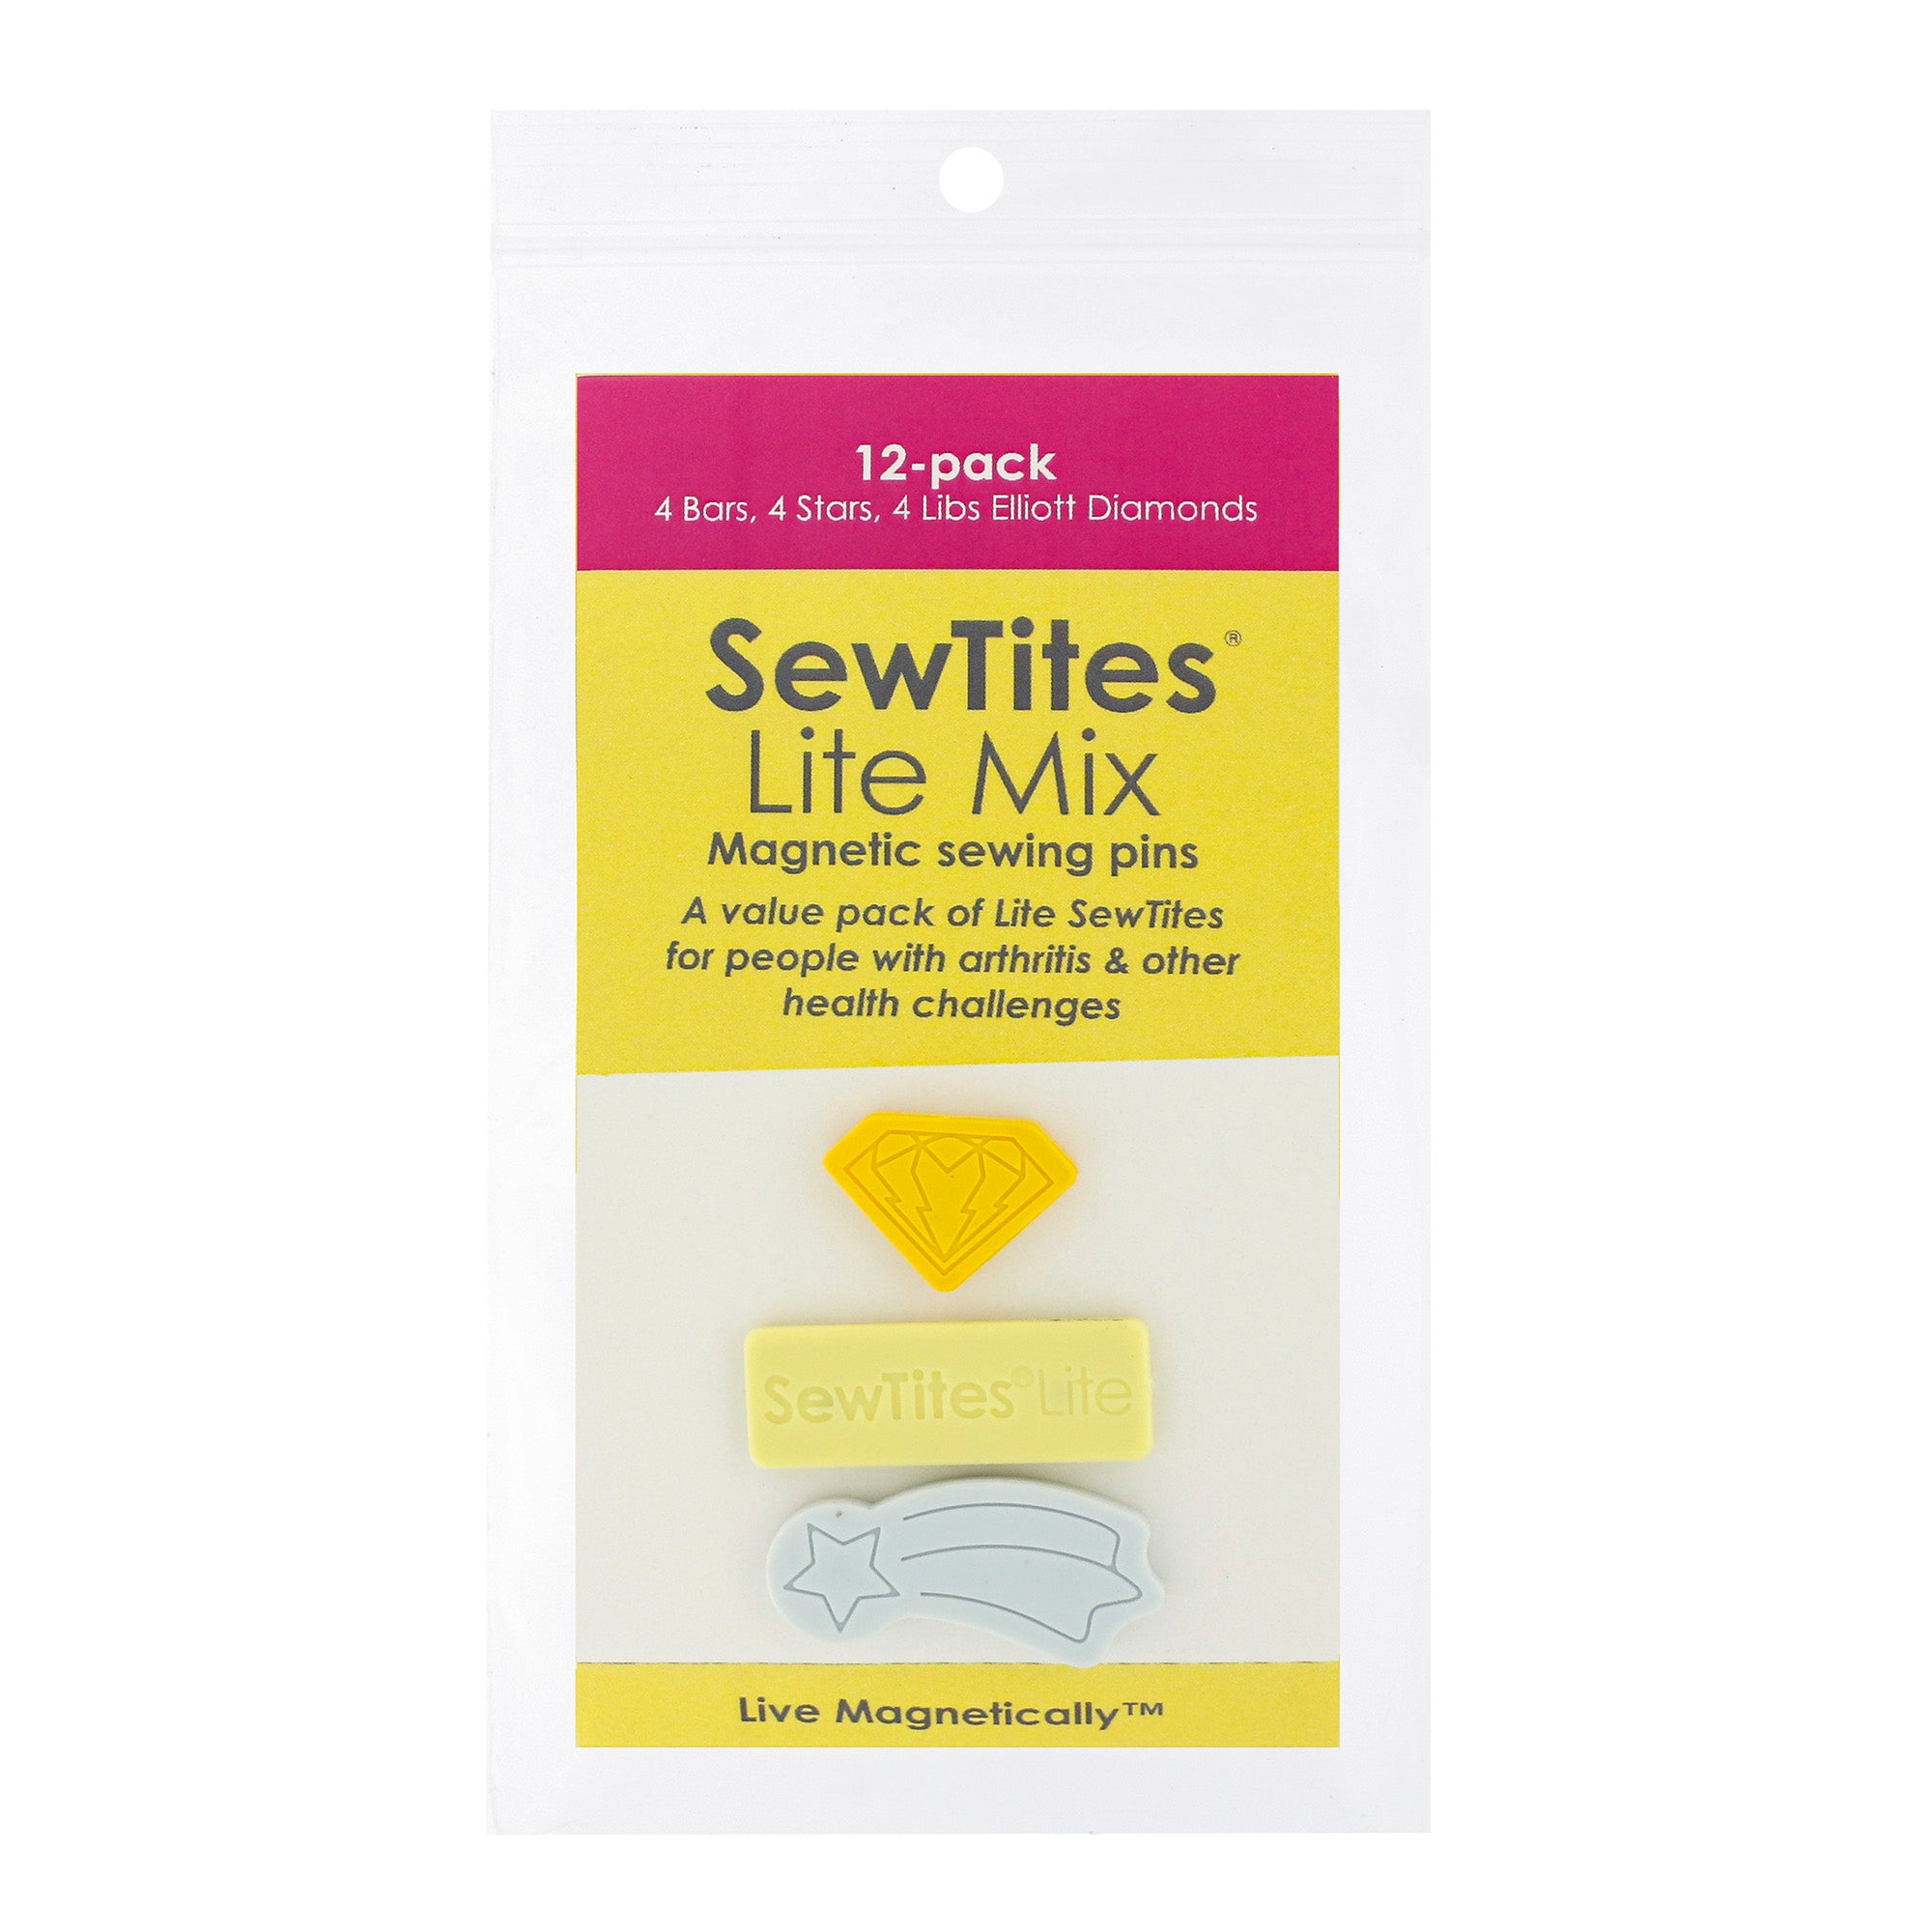 SewTites Hand Mix - Magnetic Sewing Pins 12-Pack